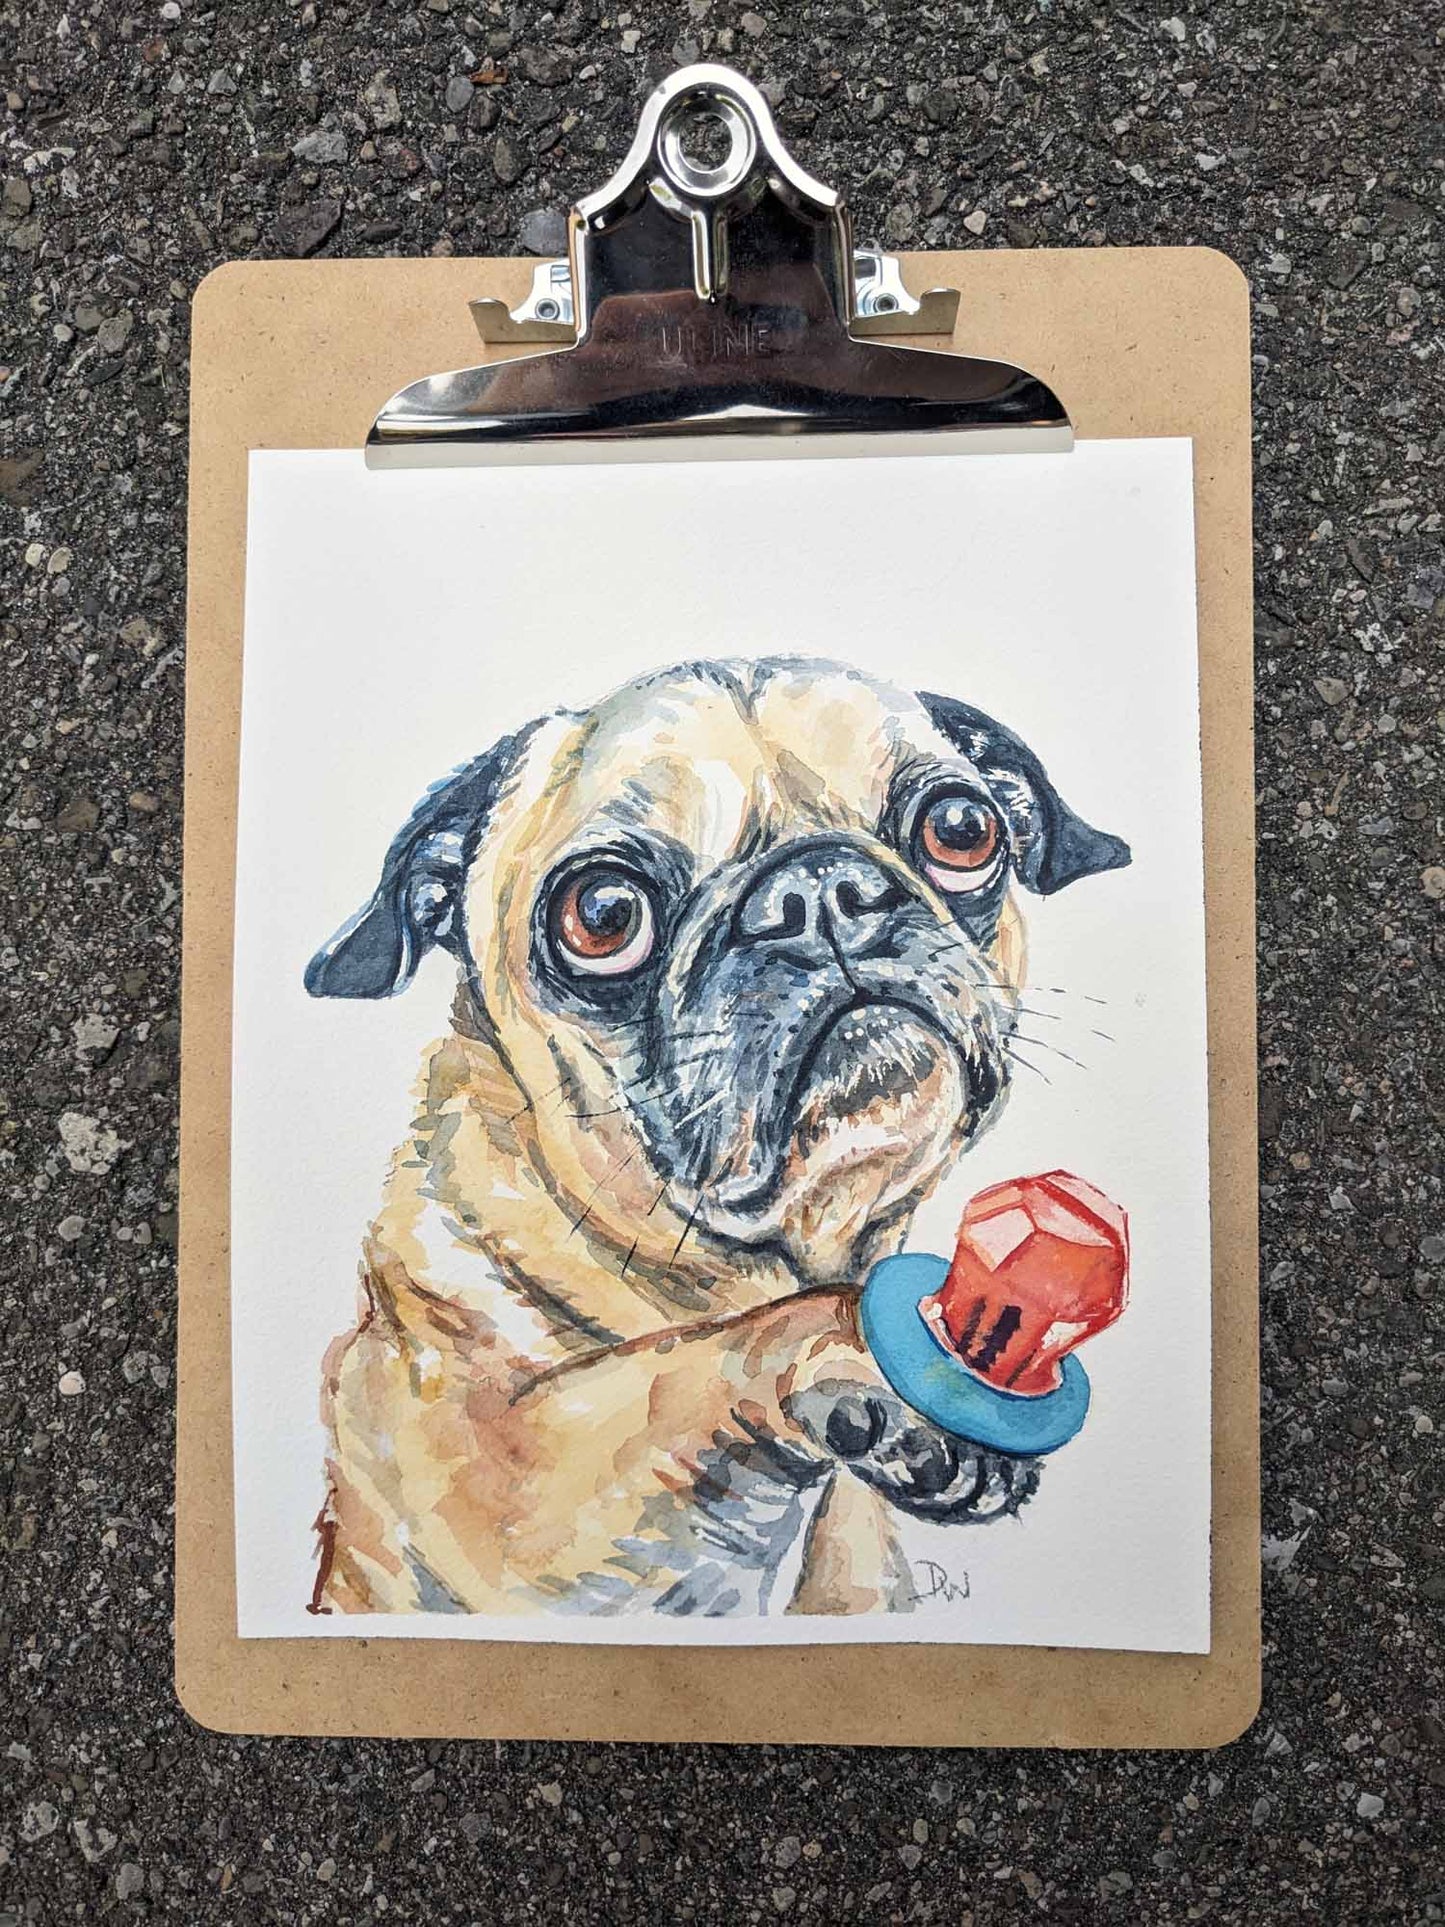 Original watercolour painting of an adorable pug dog offering to share his candy. Art by Deidre Wicks